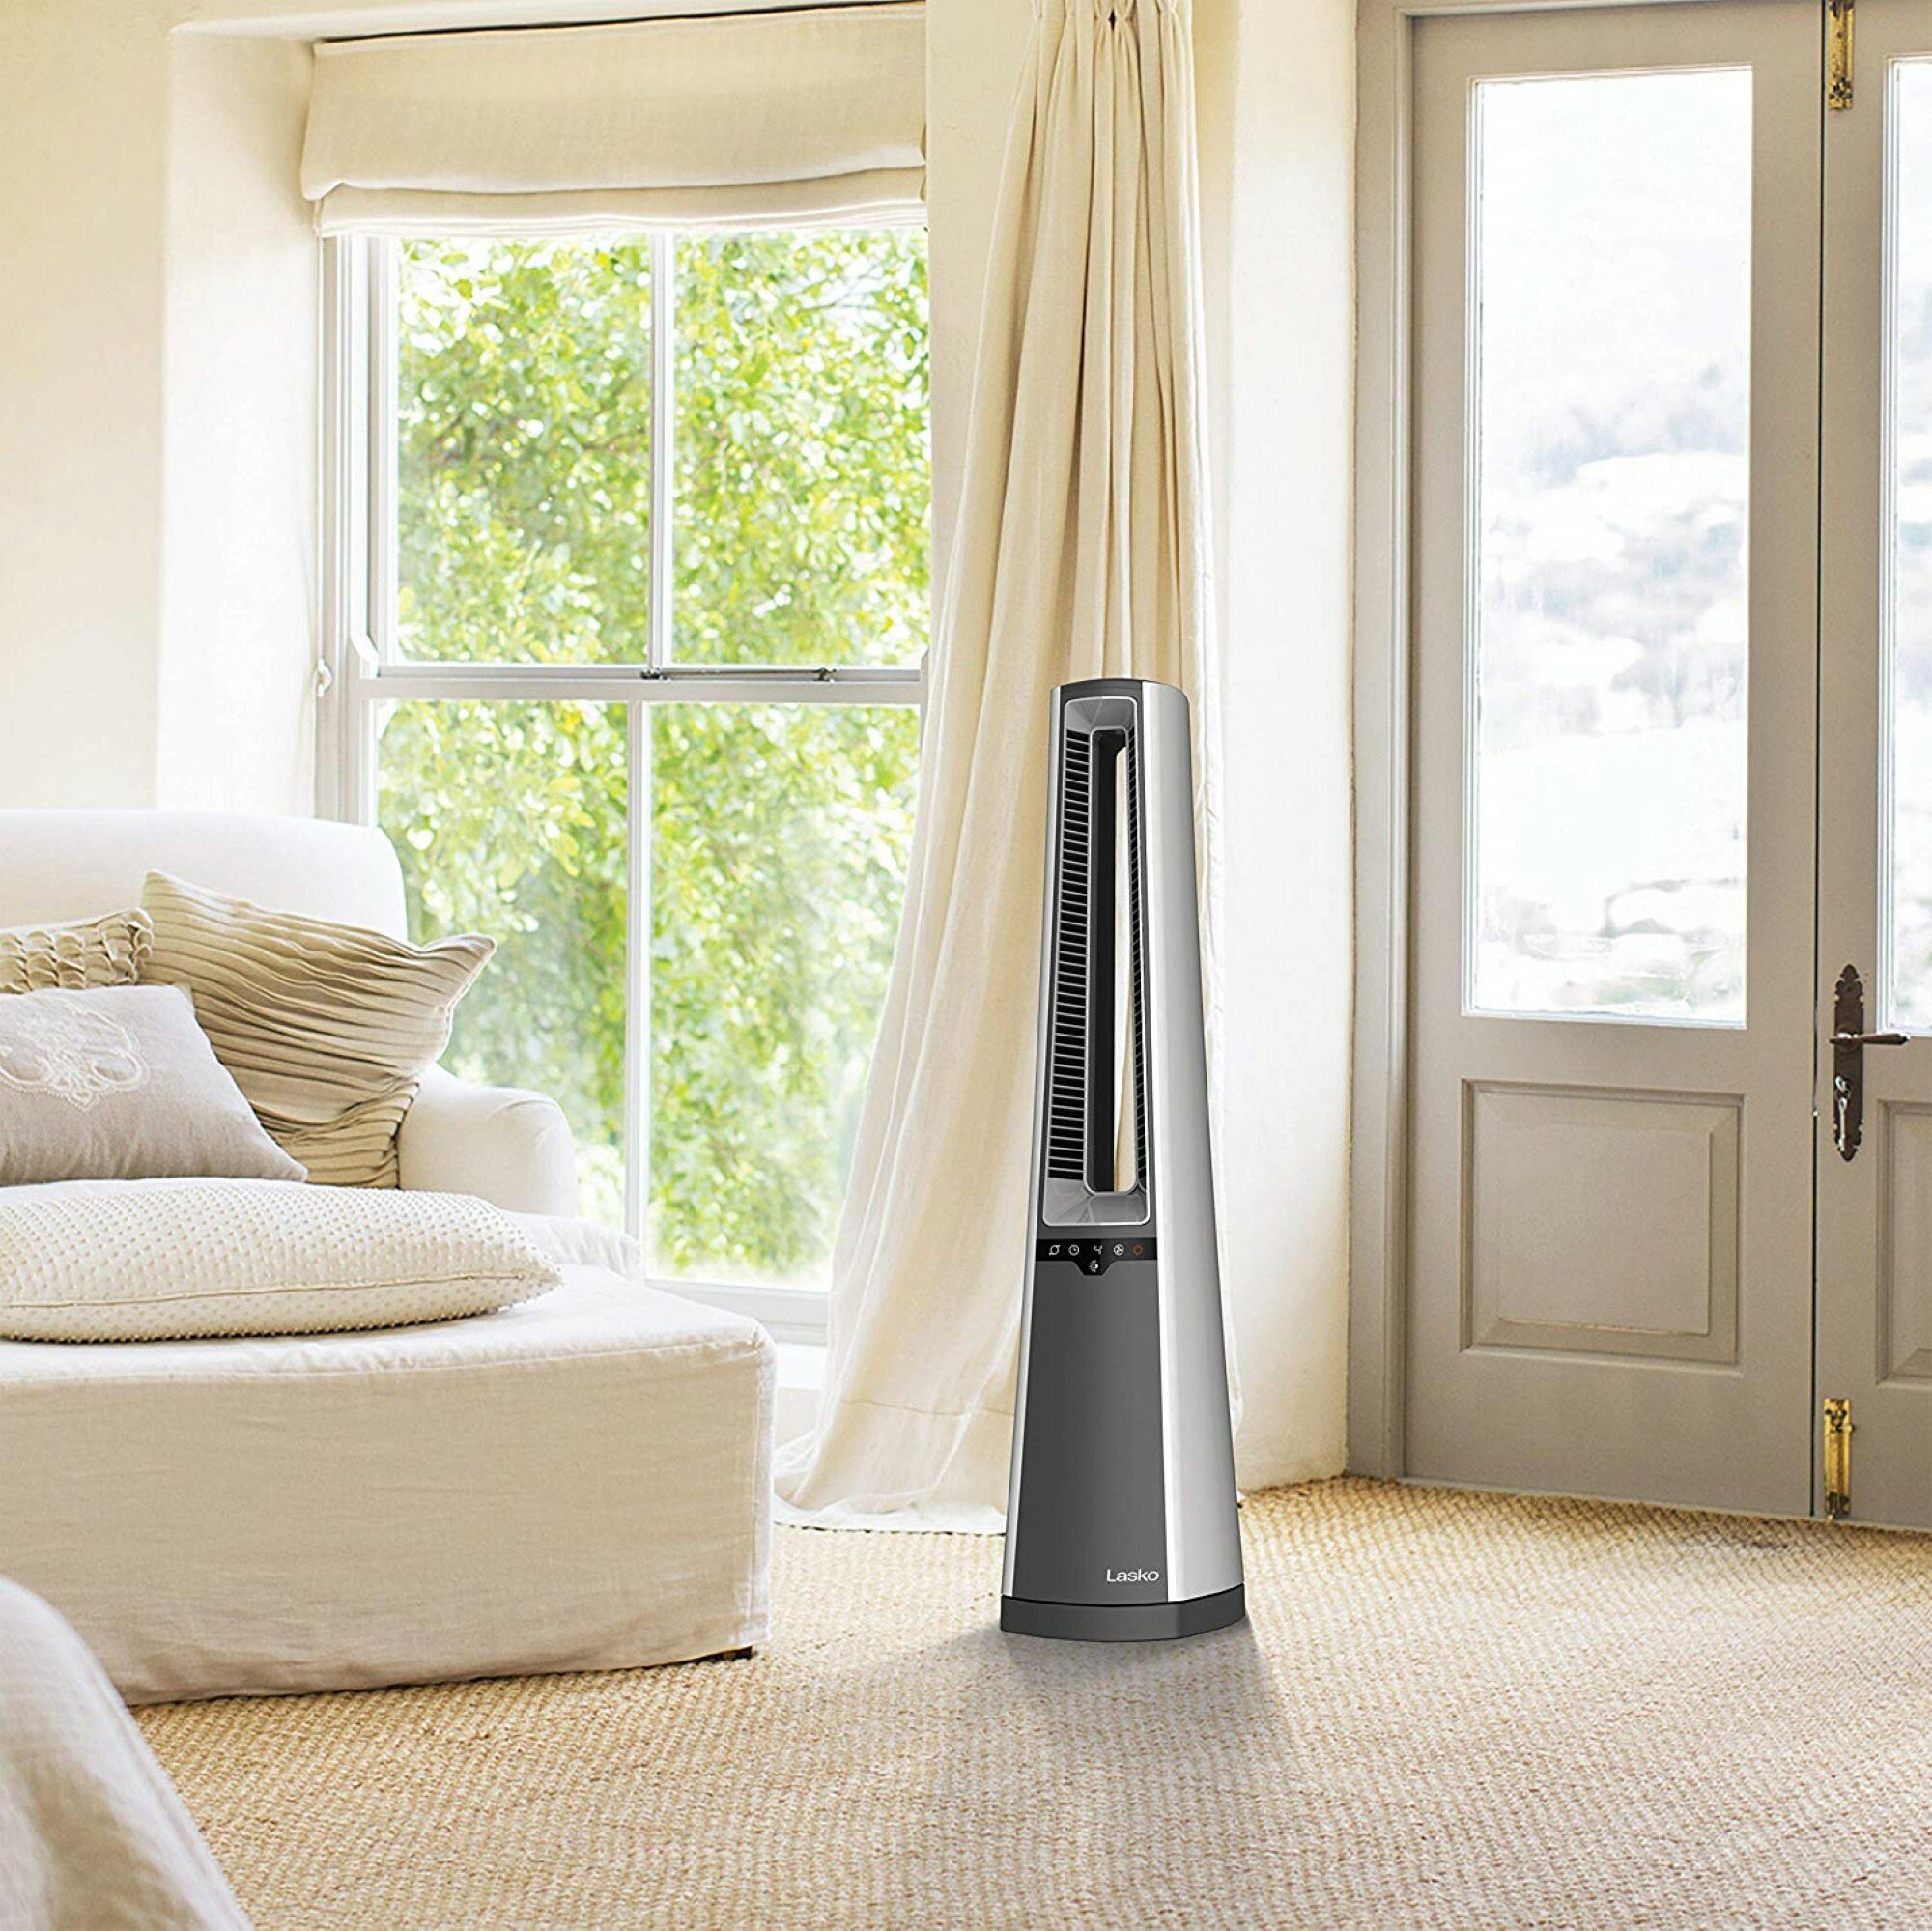 Lasko AC615 4-Speed Bladeless Tower Fan with Remote Control